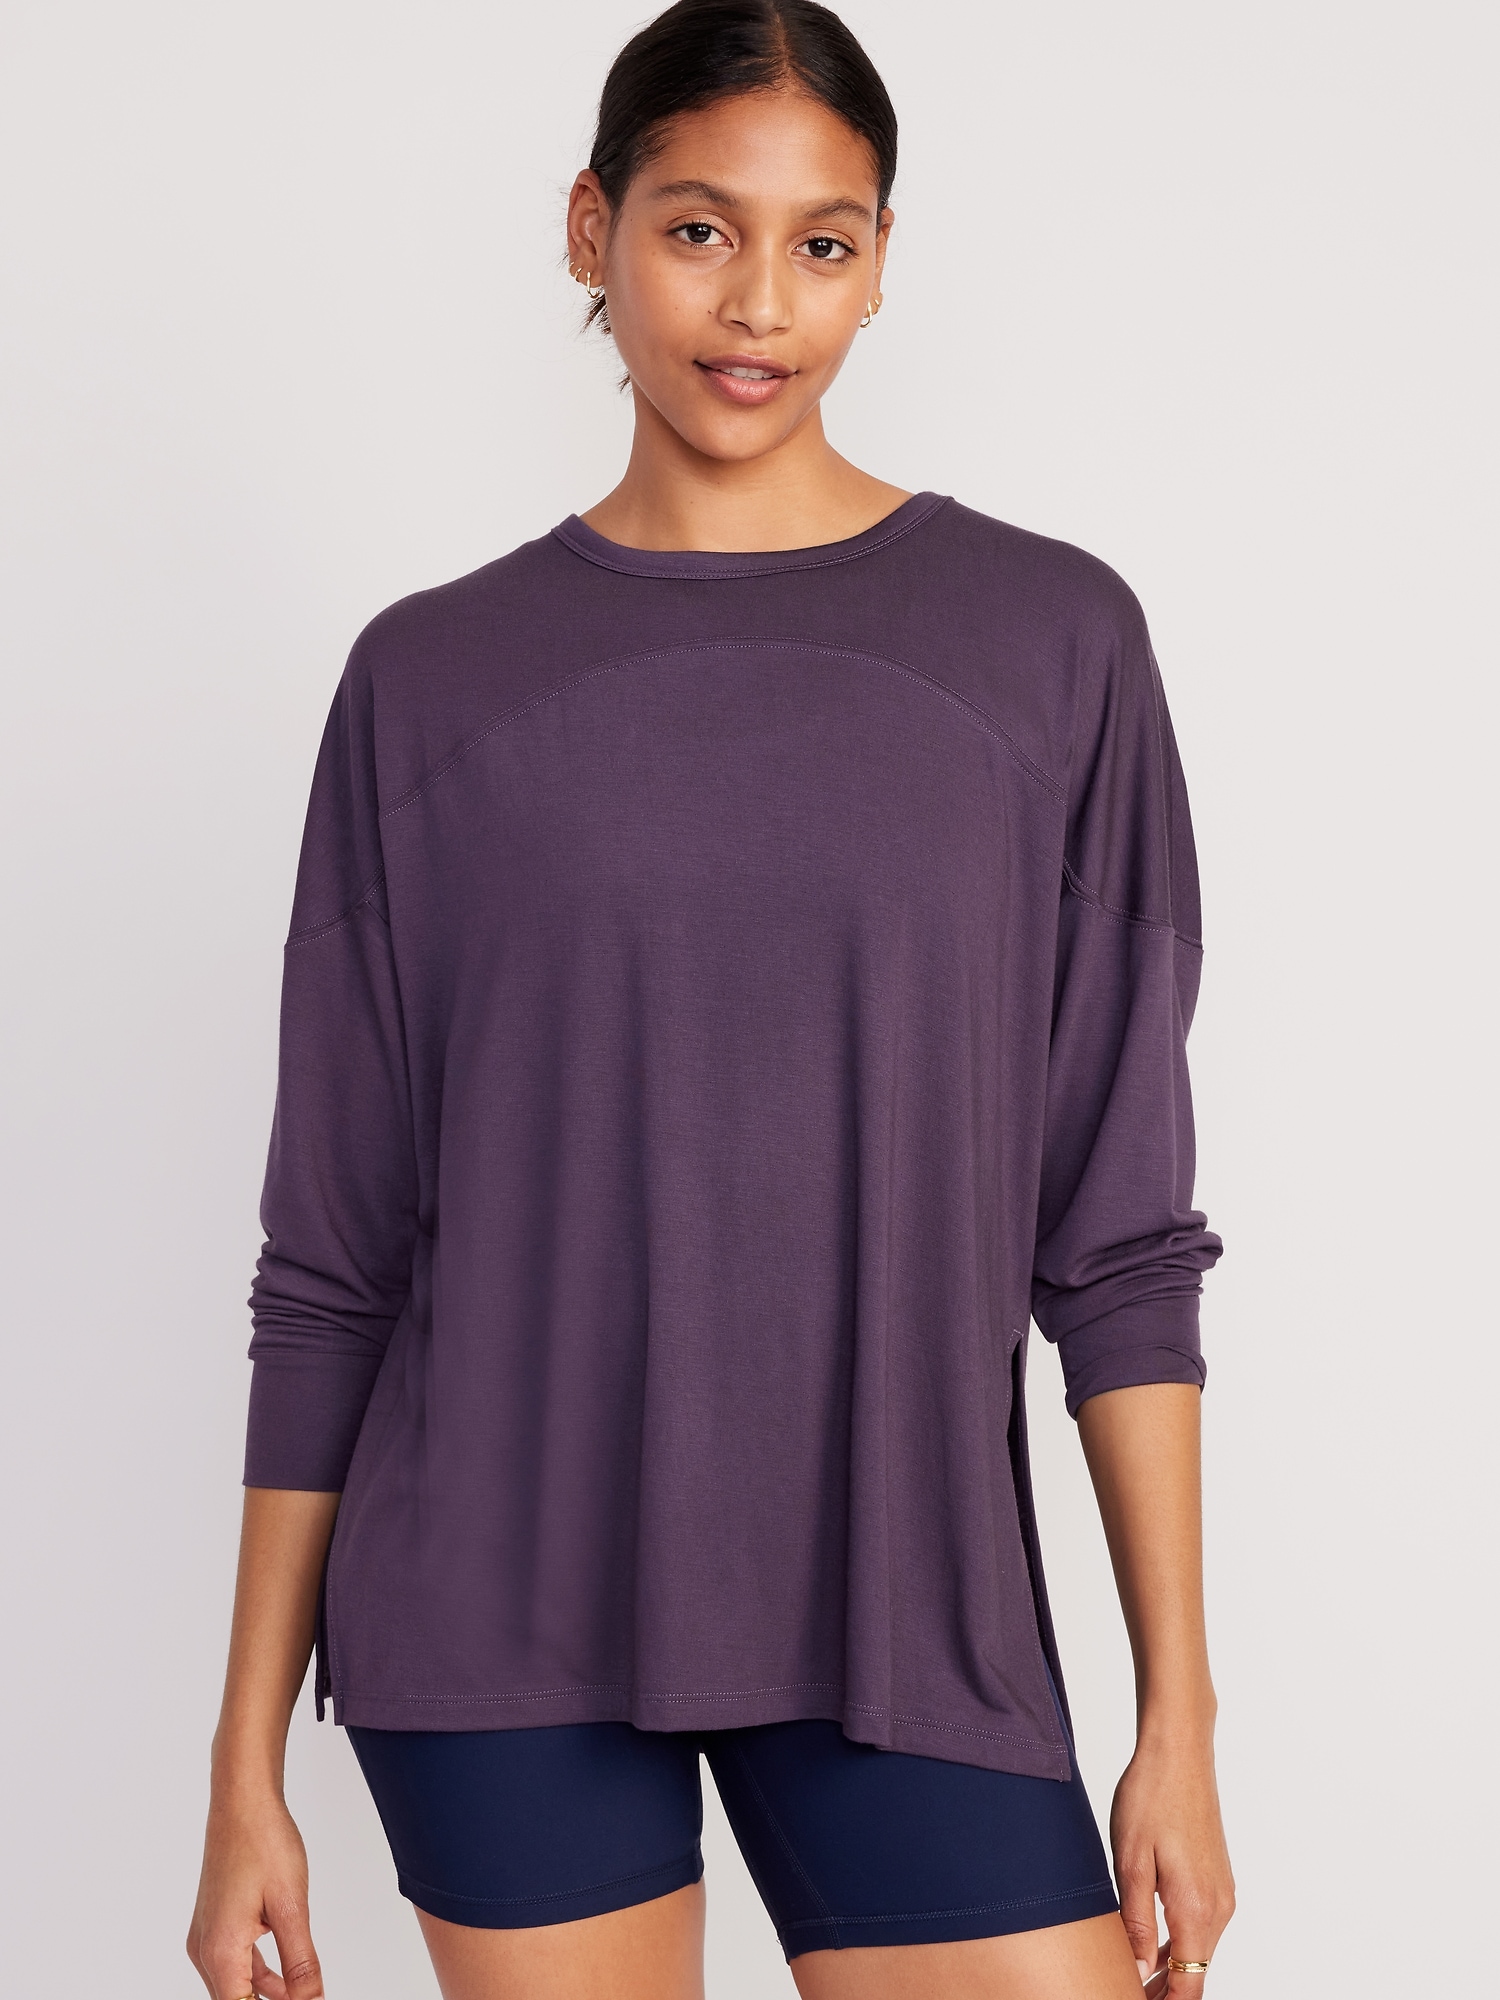 Old Navy Oversized UltraLite All-Day Tunic for Women purple. 1